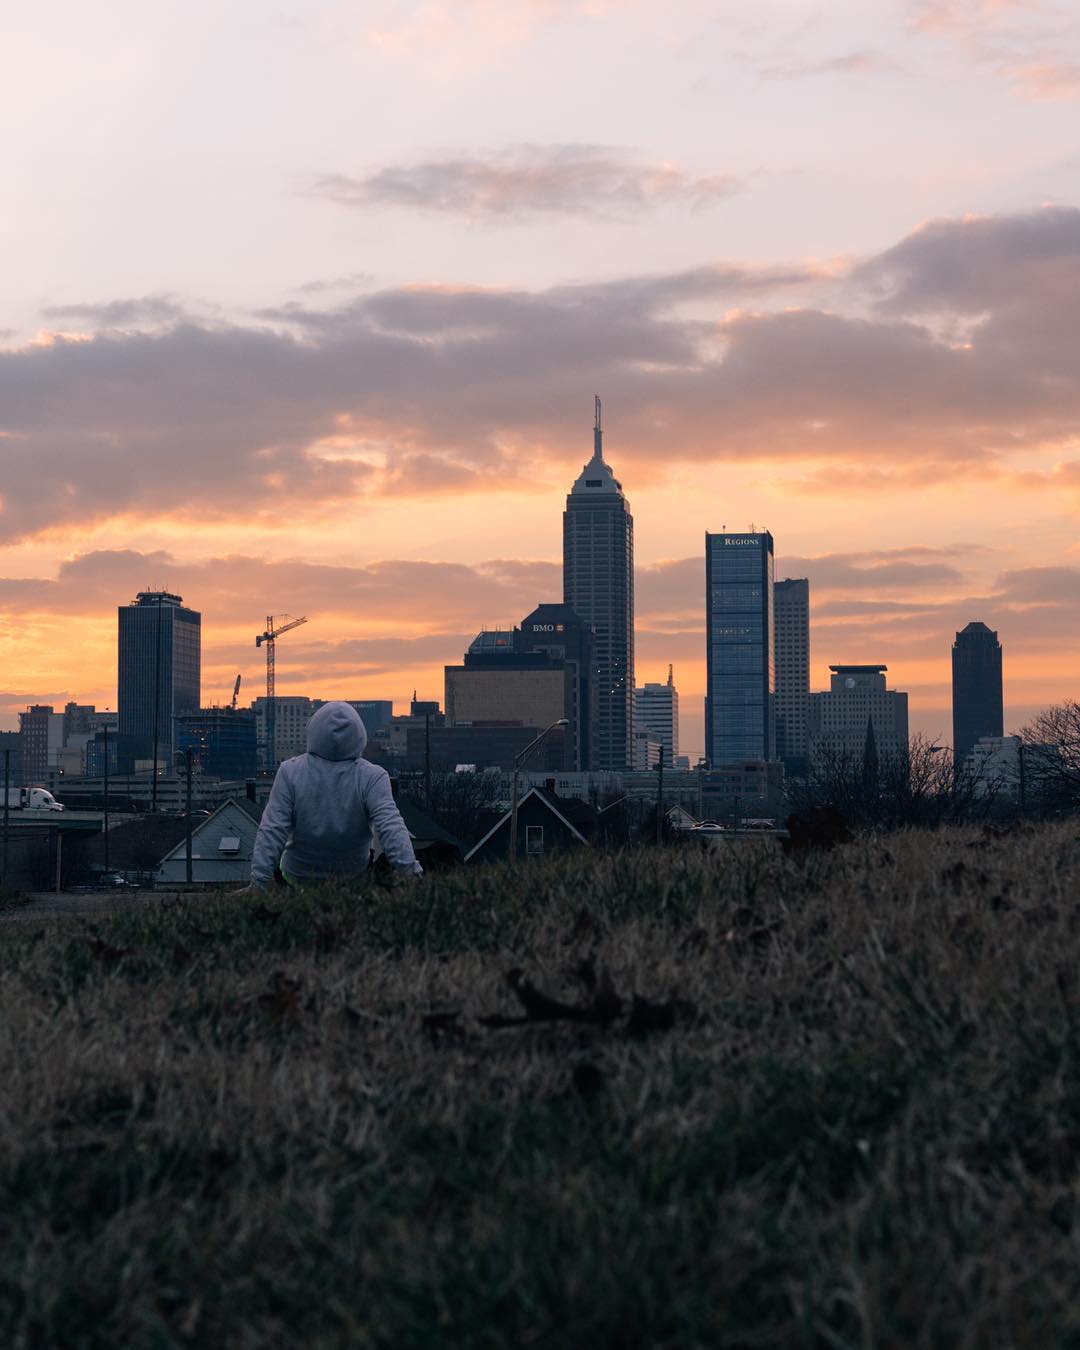 Signing off with my #localwanderer takeover of the best view to watch the sunset in Indy, Highland Park. Thank you #AlaskaAir for allowing me to showcase a small snippet of what Indy and Indiana has to offer.